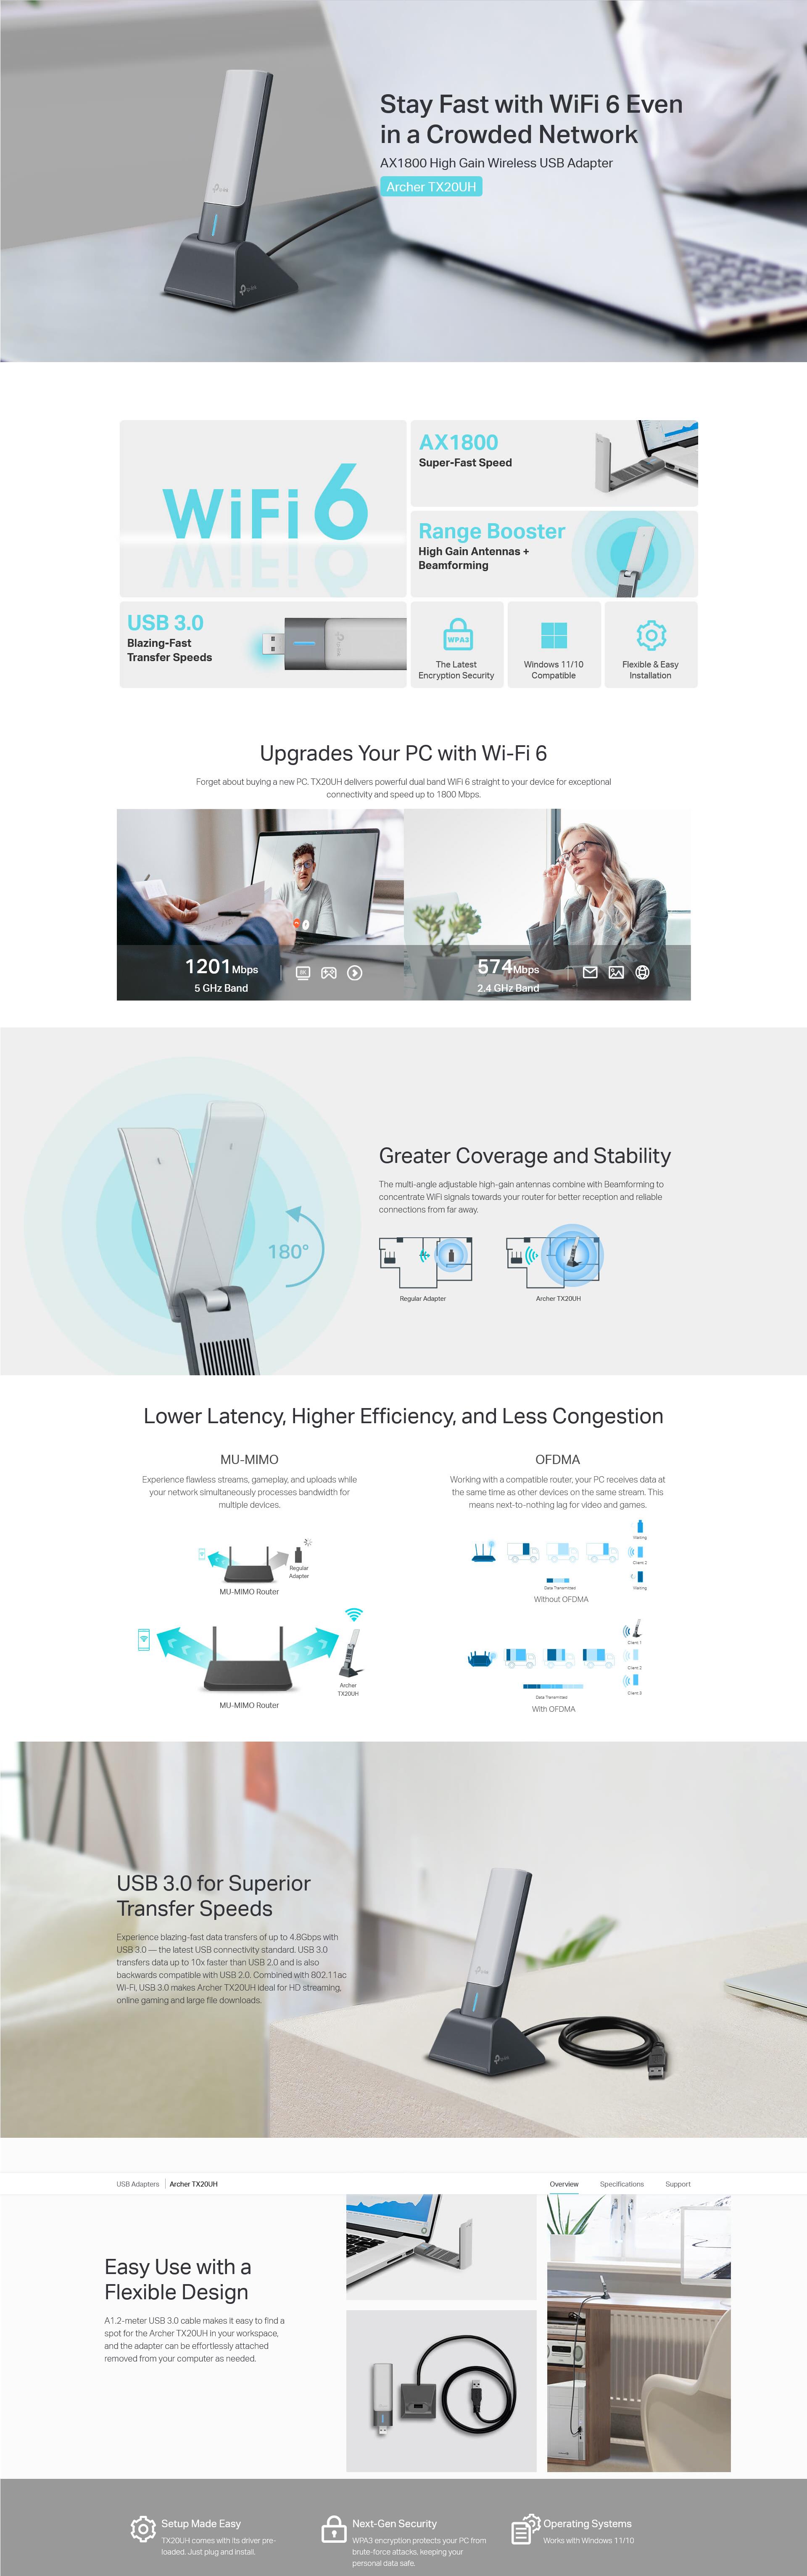 A large marketing image providing additional information about the product TP-Link Archer TX20UH - AX1800 High Gain Wi-Fi 6 USB Adapter - Additional alt info not provided